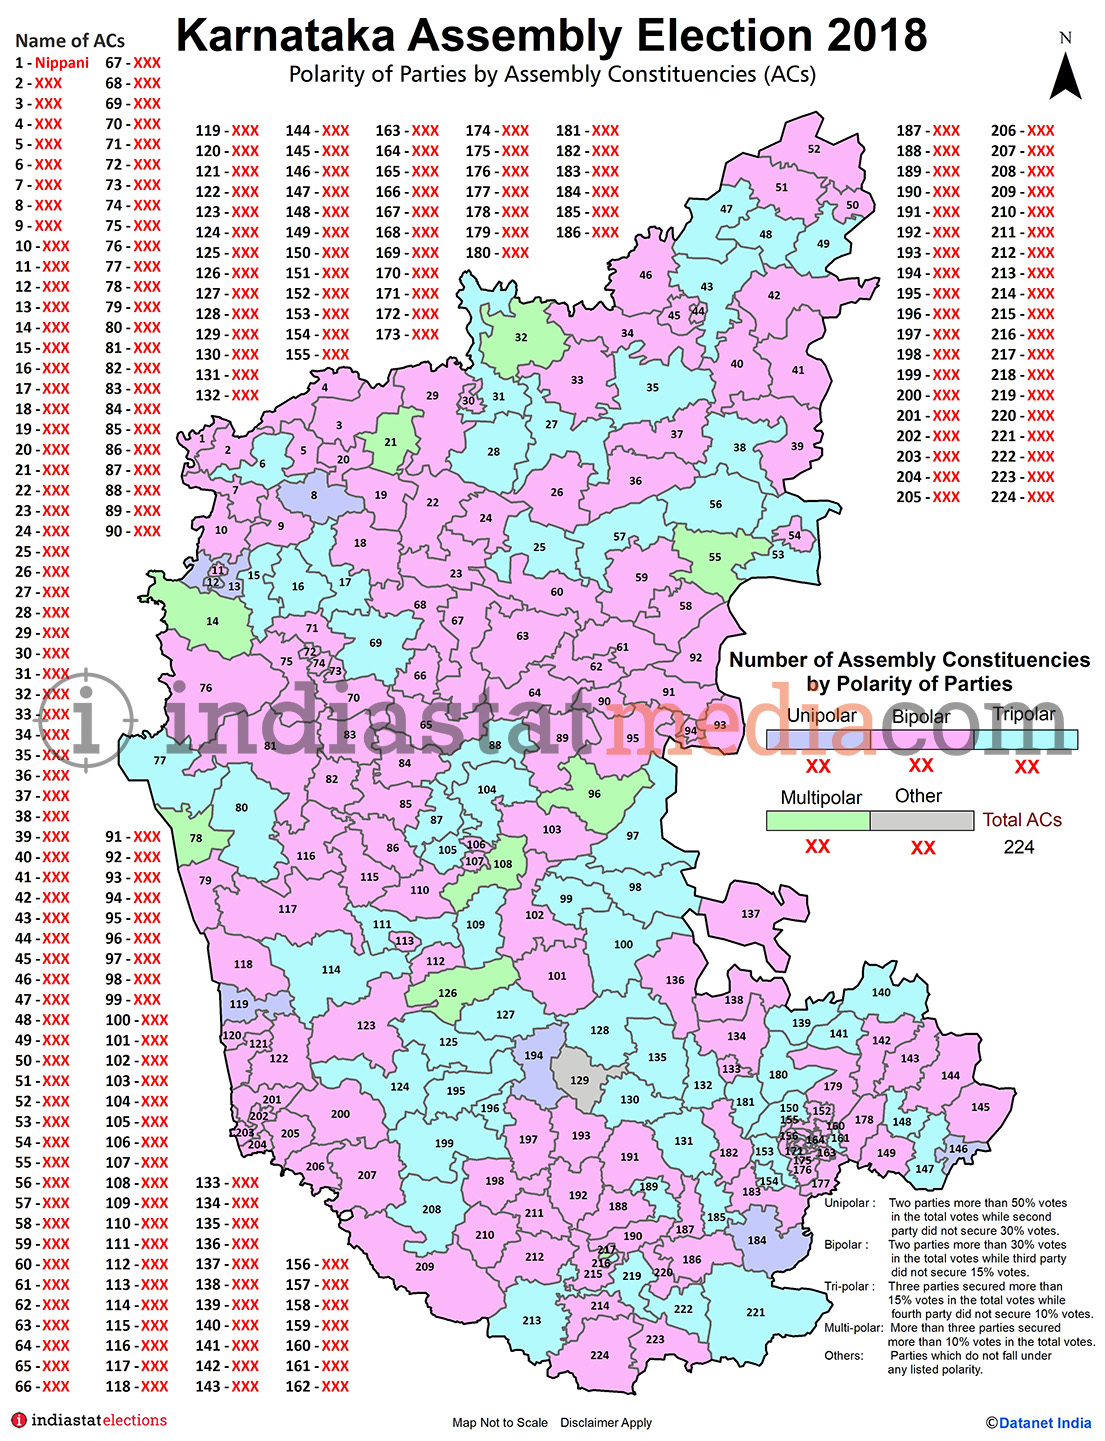 Polarity of Parties by Assembly Constituencies in Karnataka (Assembly Election - 2018)